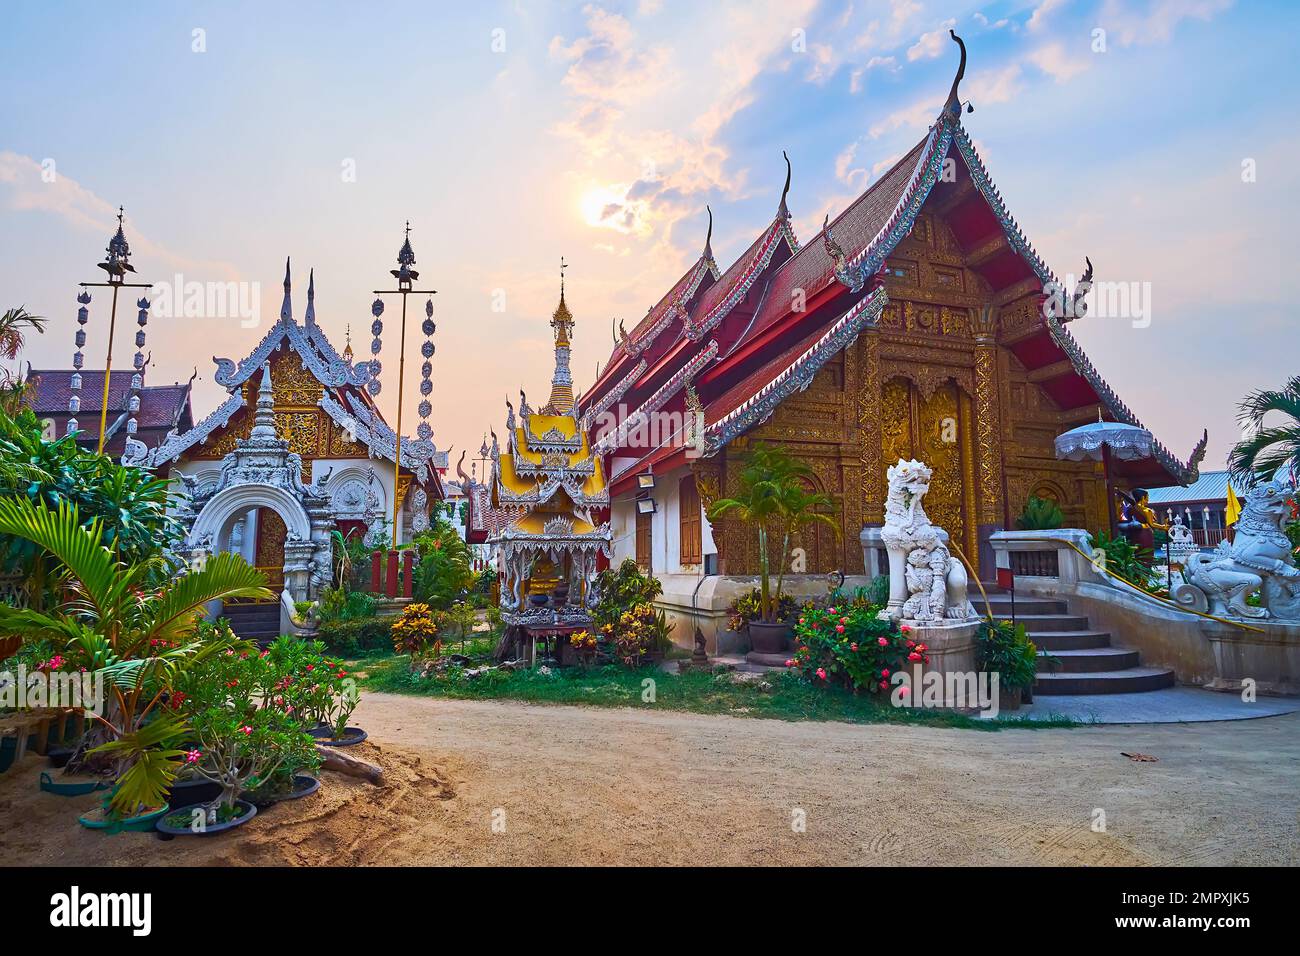 The cloudy sunset sky over the ornate shrines of medieval Wat Mahawan, surrounded with flowering garden, Chiang Mai, Thailand Stock Photo